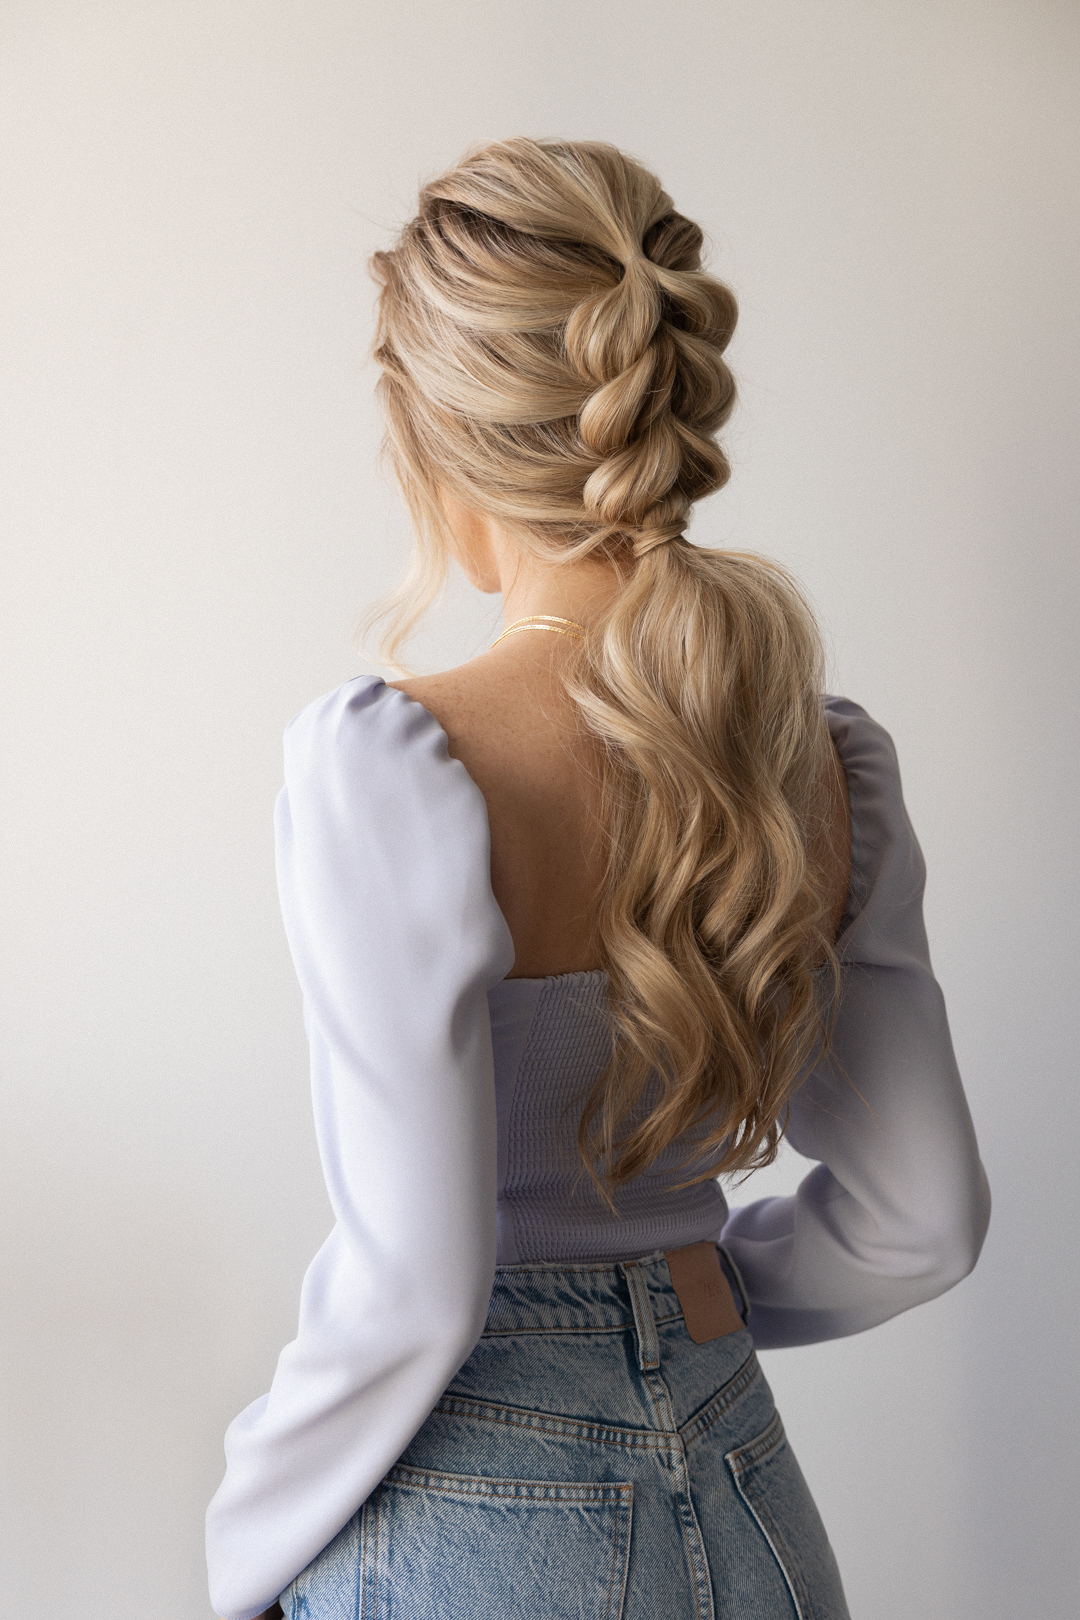 These Ponytail Hairstyles Are Easy To Do And Look Amazing